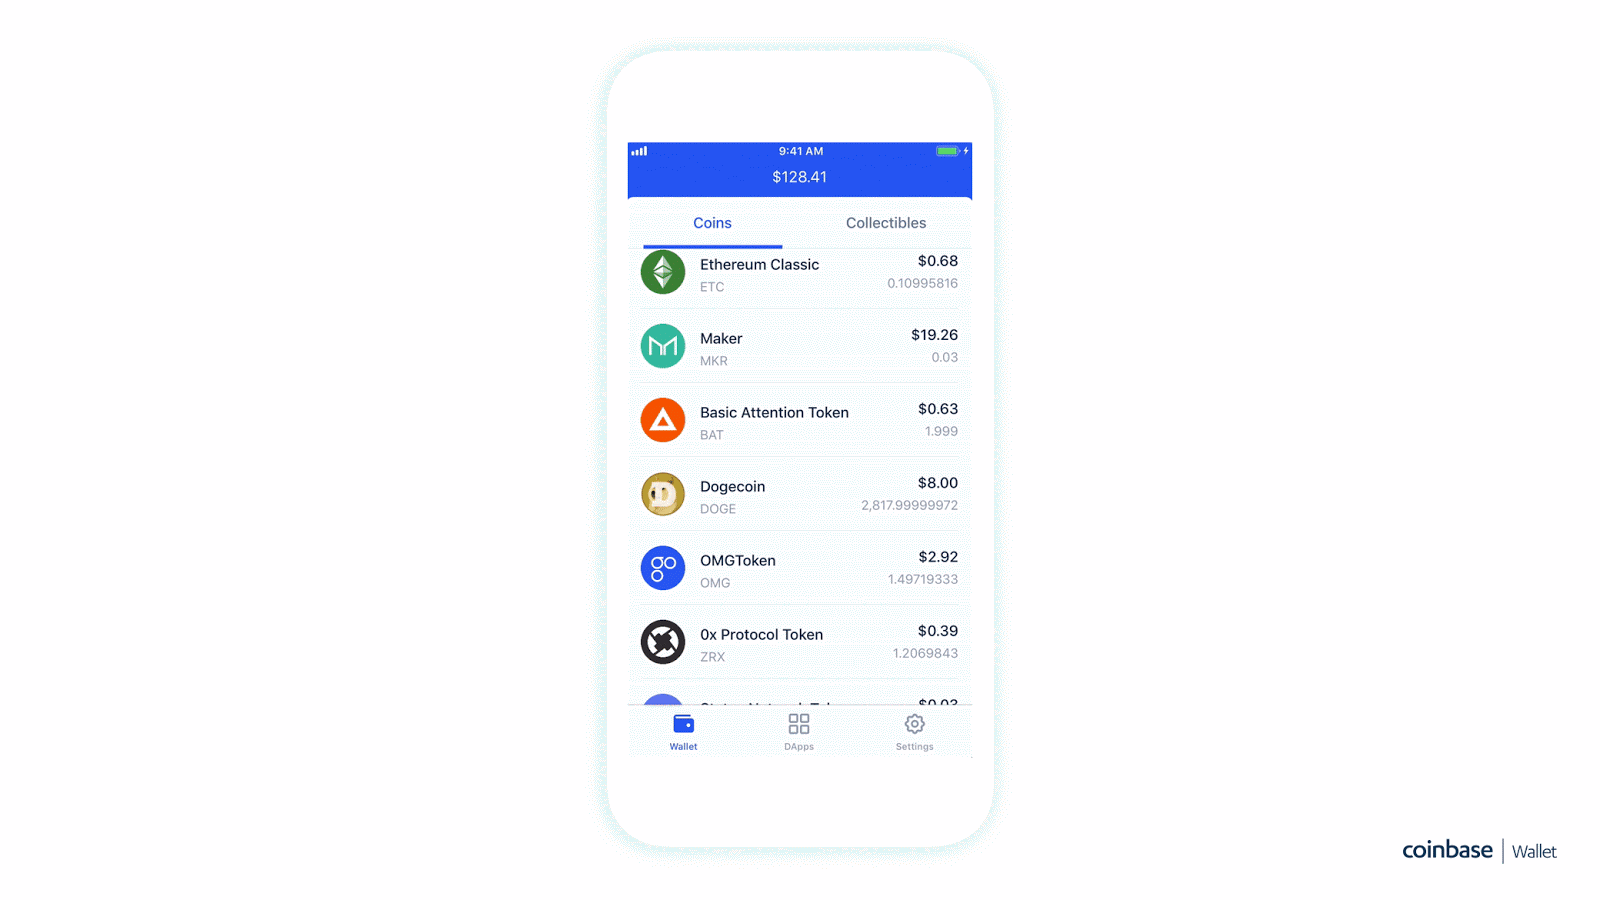 what crypto wallets support dogecoin